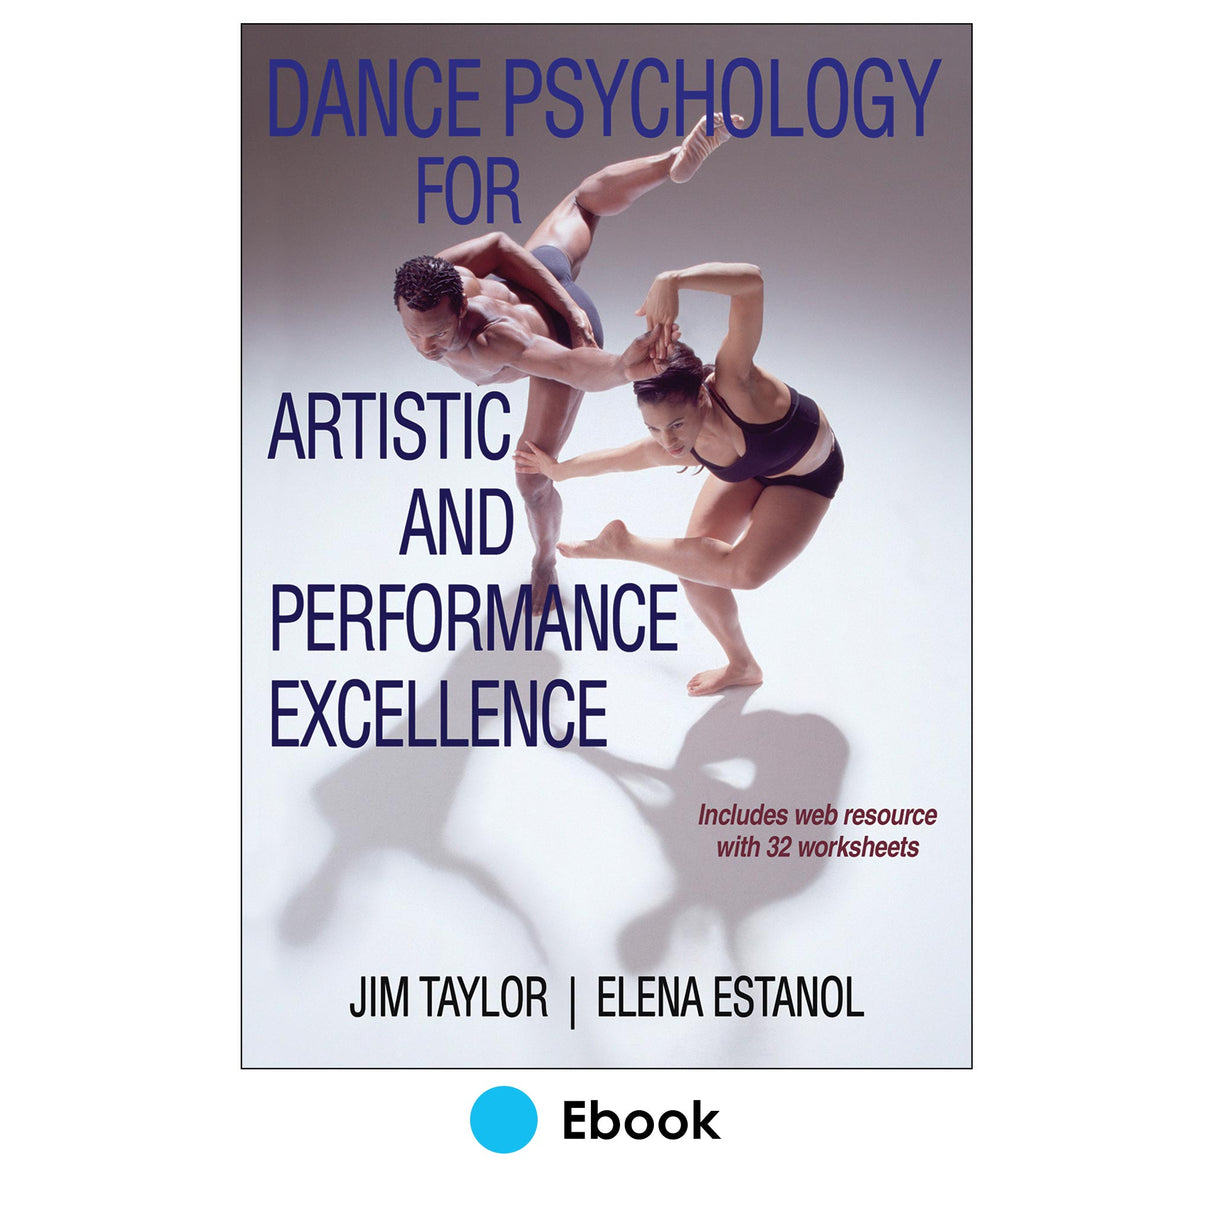 Dance Psychology for Artistic and Performance Excellence PDF With Web Resource